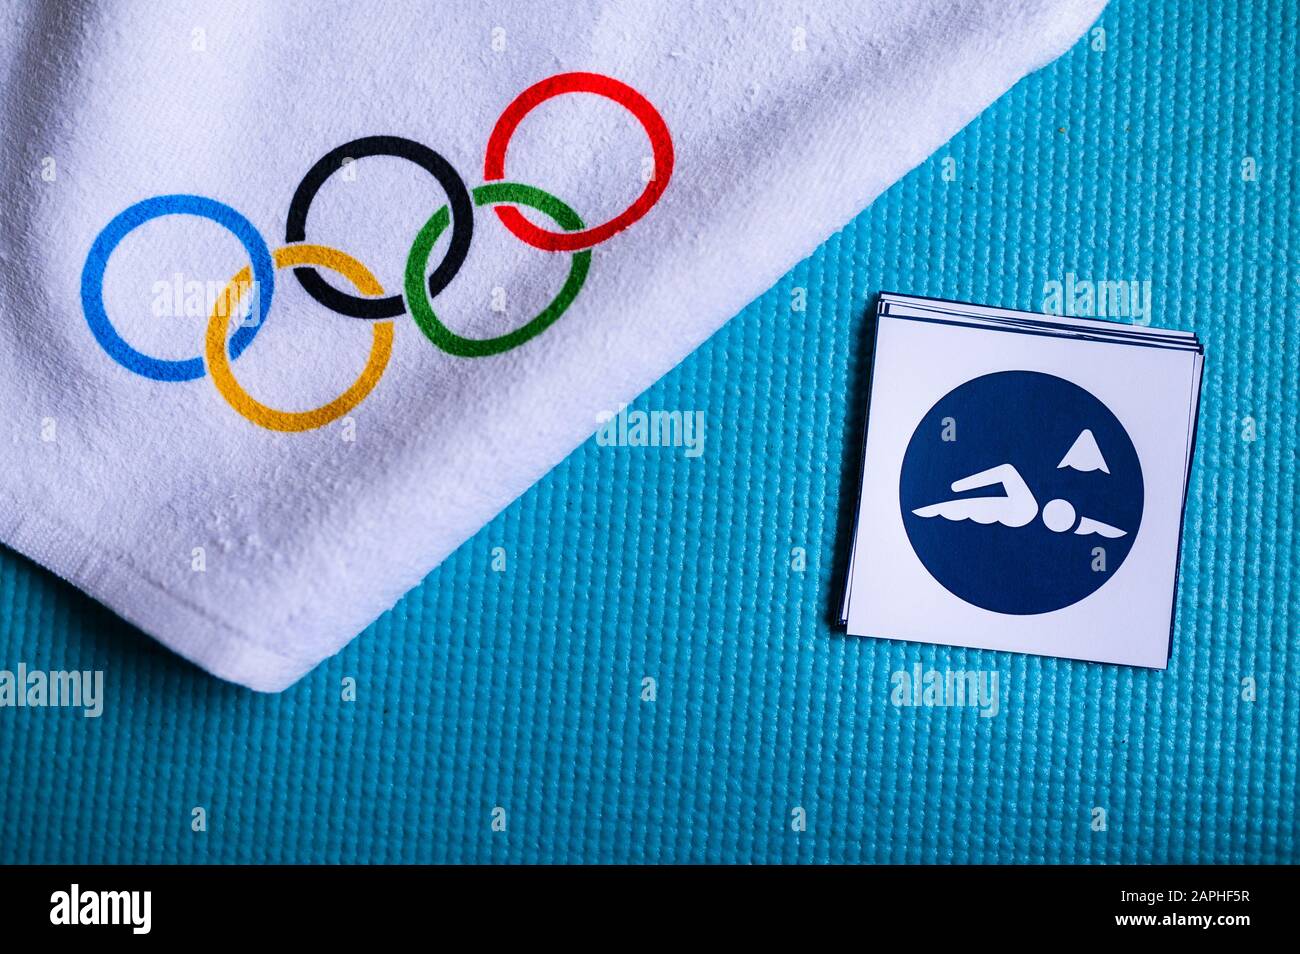 TOKYO, JAPAN, JANUARY. 20. 2020: Marathon Swimming pictogram and olympic rings. Original wallpaper for olympic game Stock Photo